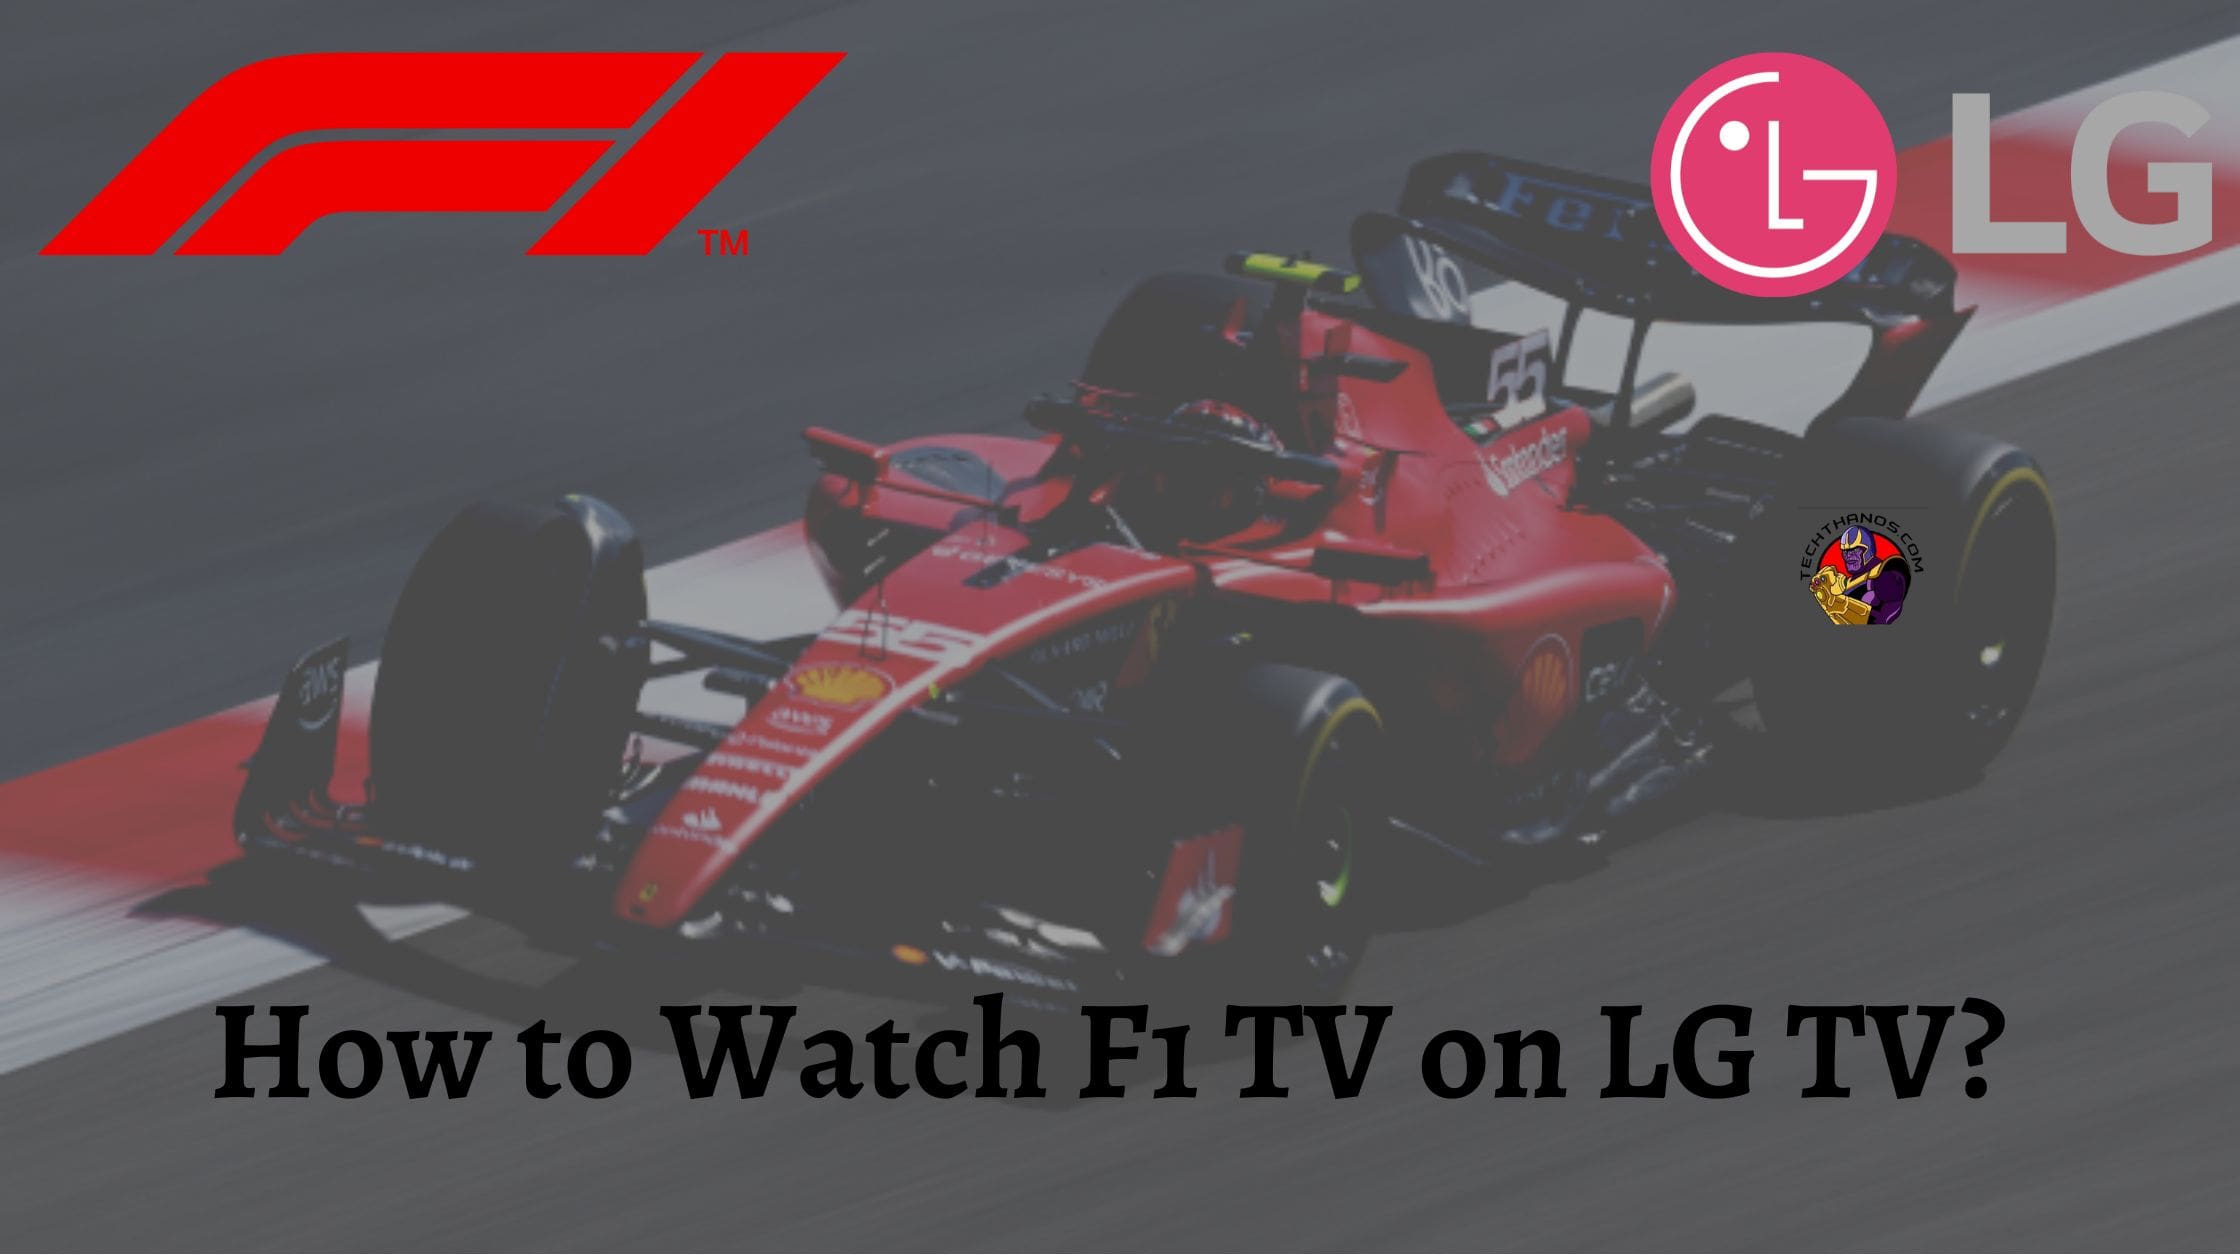 How to Watch F1 TV on LG TV?